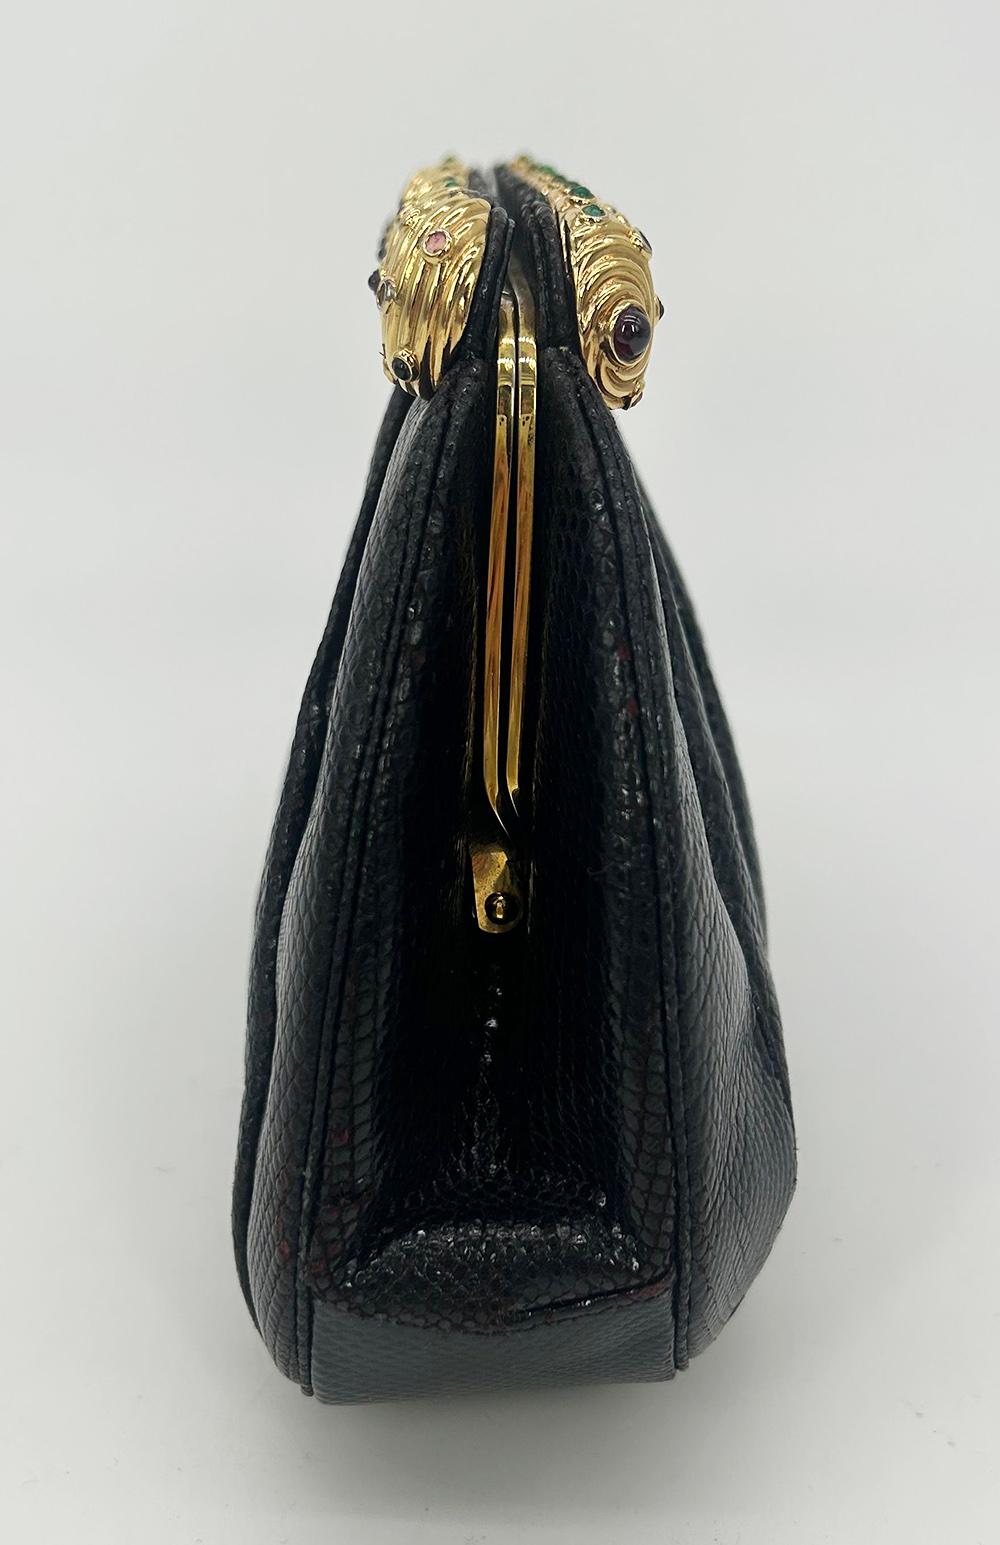 Vintage Judith Leiber Black Lizard Gold Gemstone Top Clutch in fair condition. Black lizard leather exterior trimmed with gold hardware and tiny multicolor gemstones. Side pull latch closure opens to a black nylon lined interior with one side slit